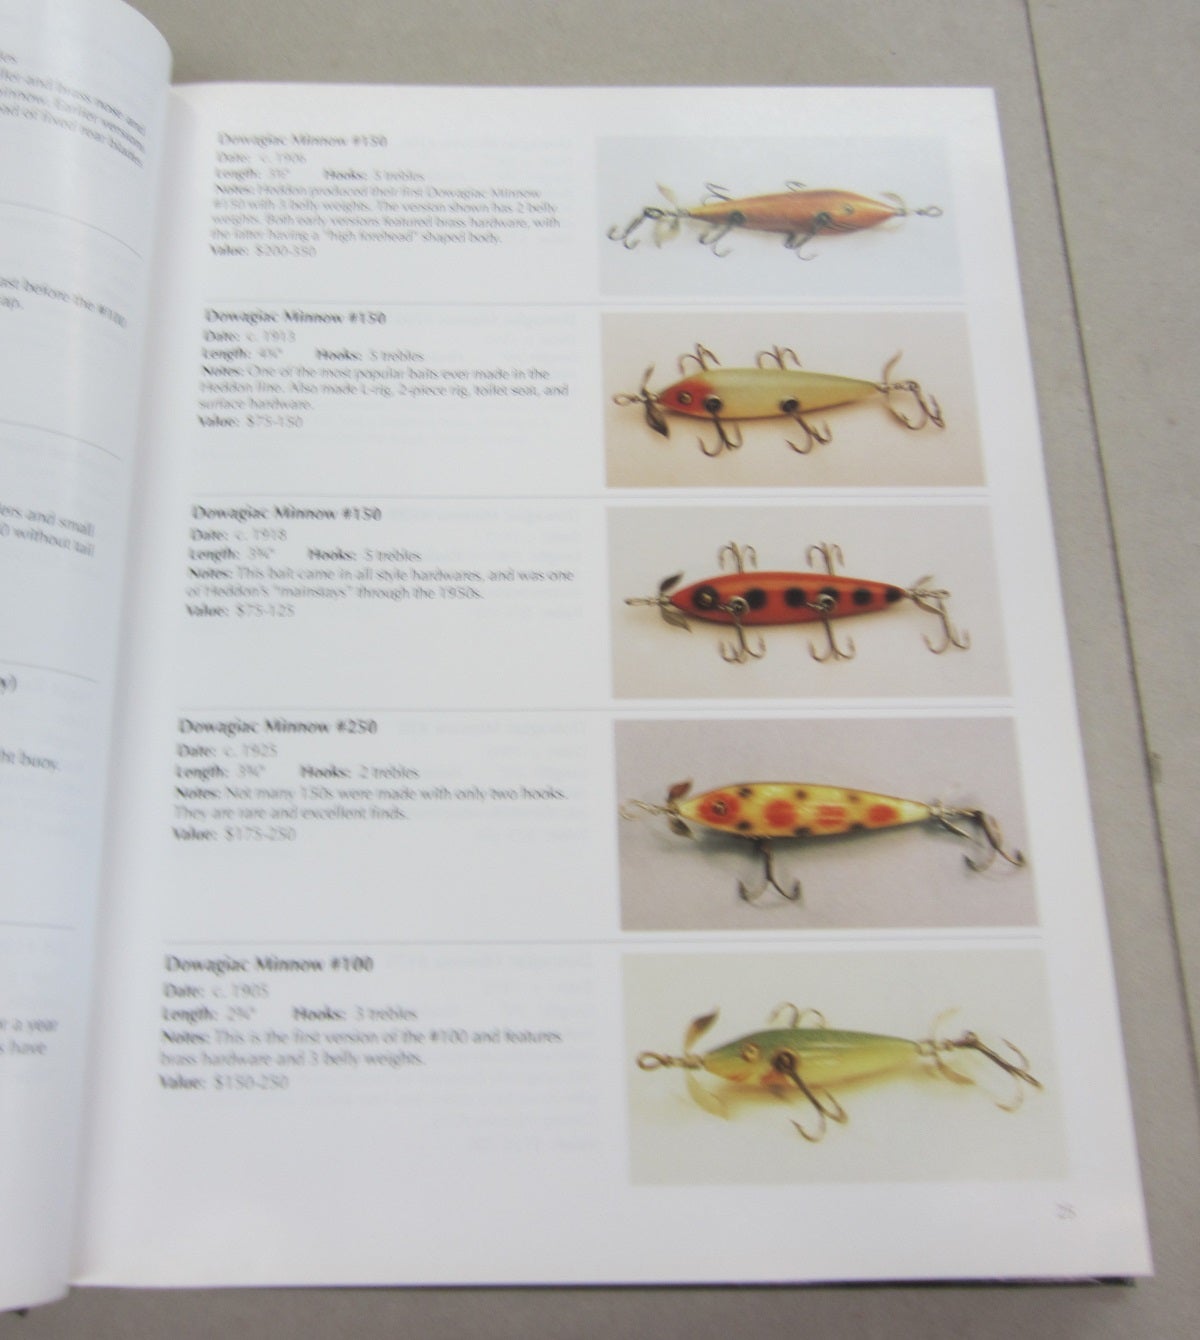 Fishing Lure Collectibles: An Identification and Value Guide to